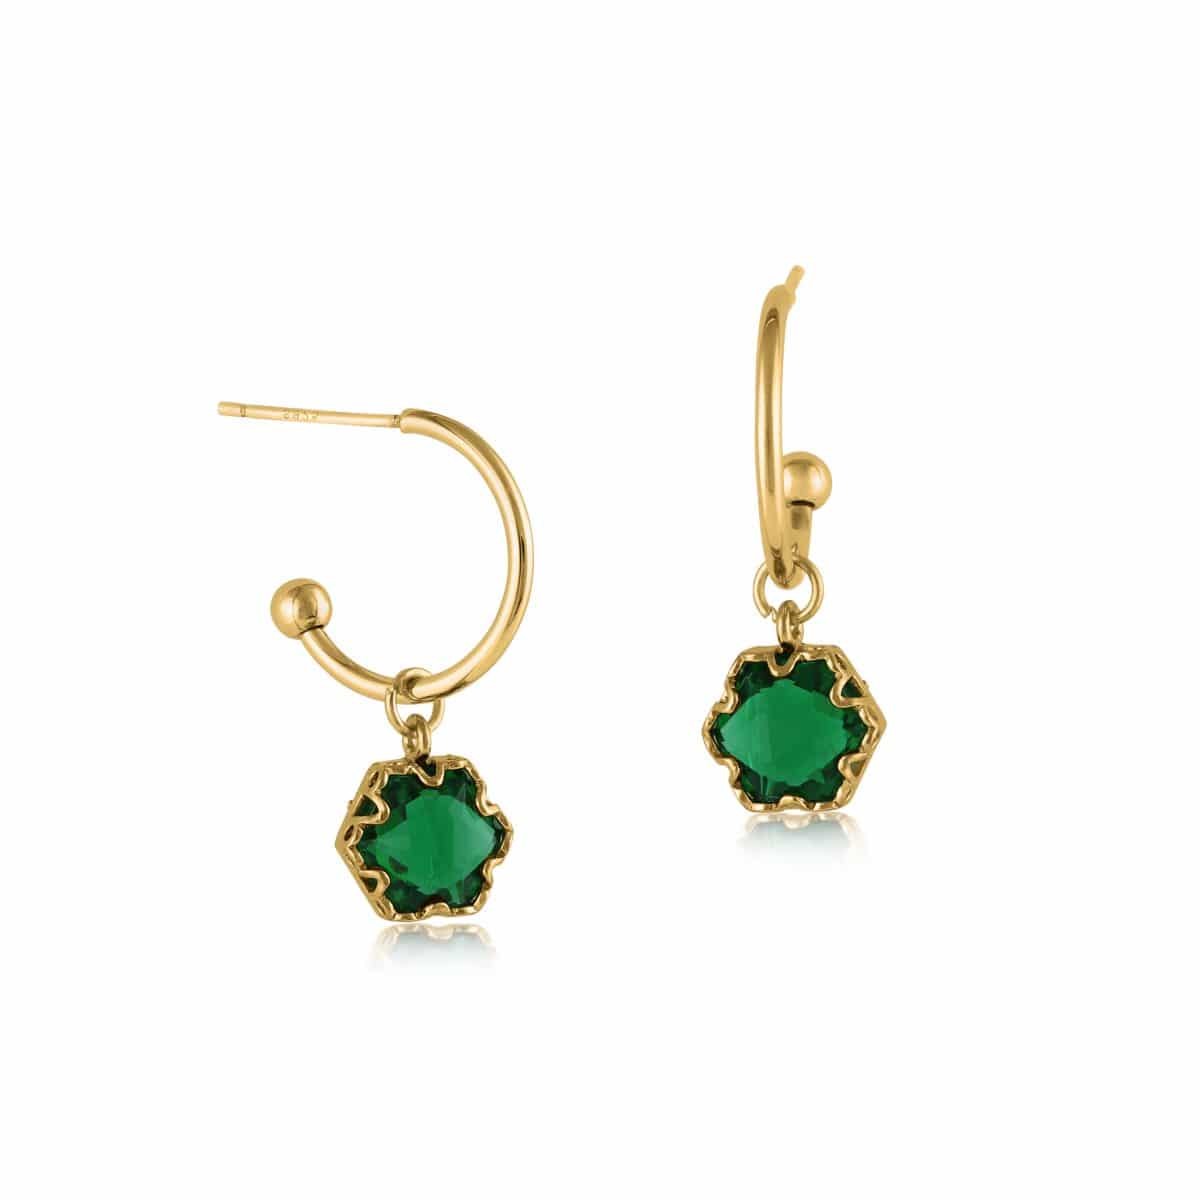 Caroline Crystal Pear Stone Tiny Hoop Earrings in Gold and Emerald